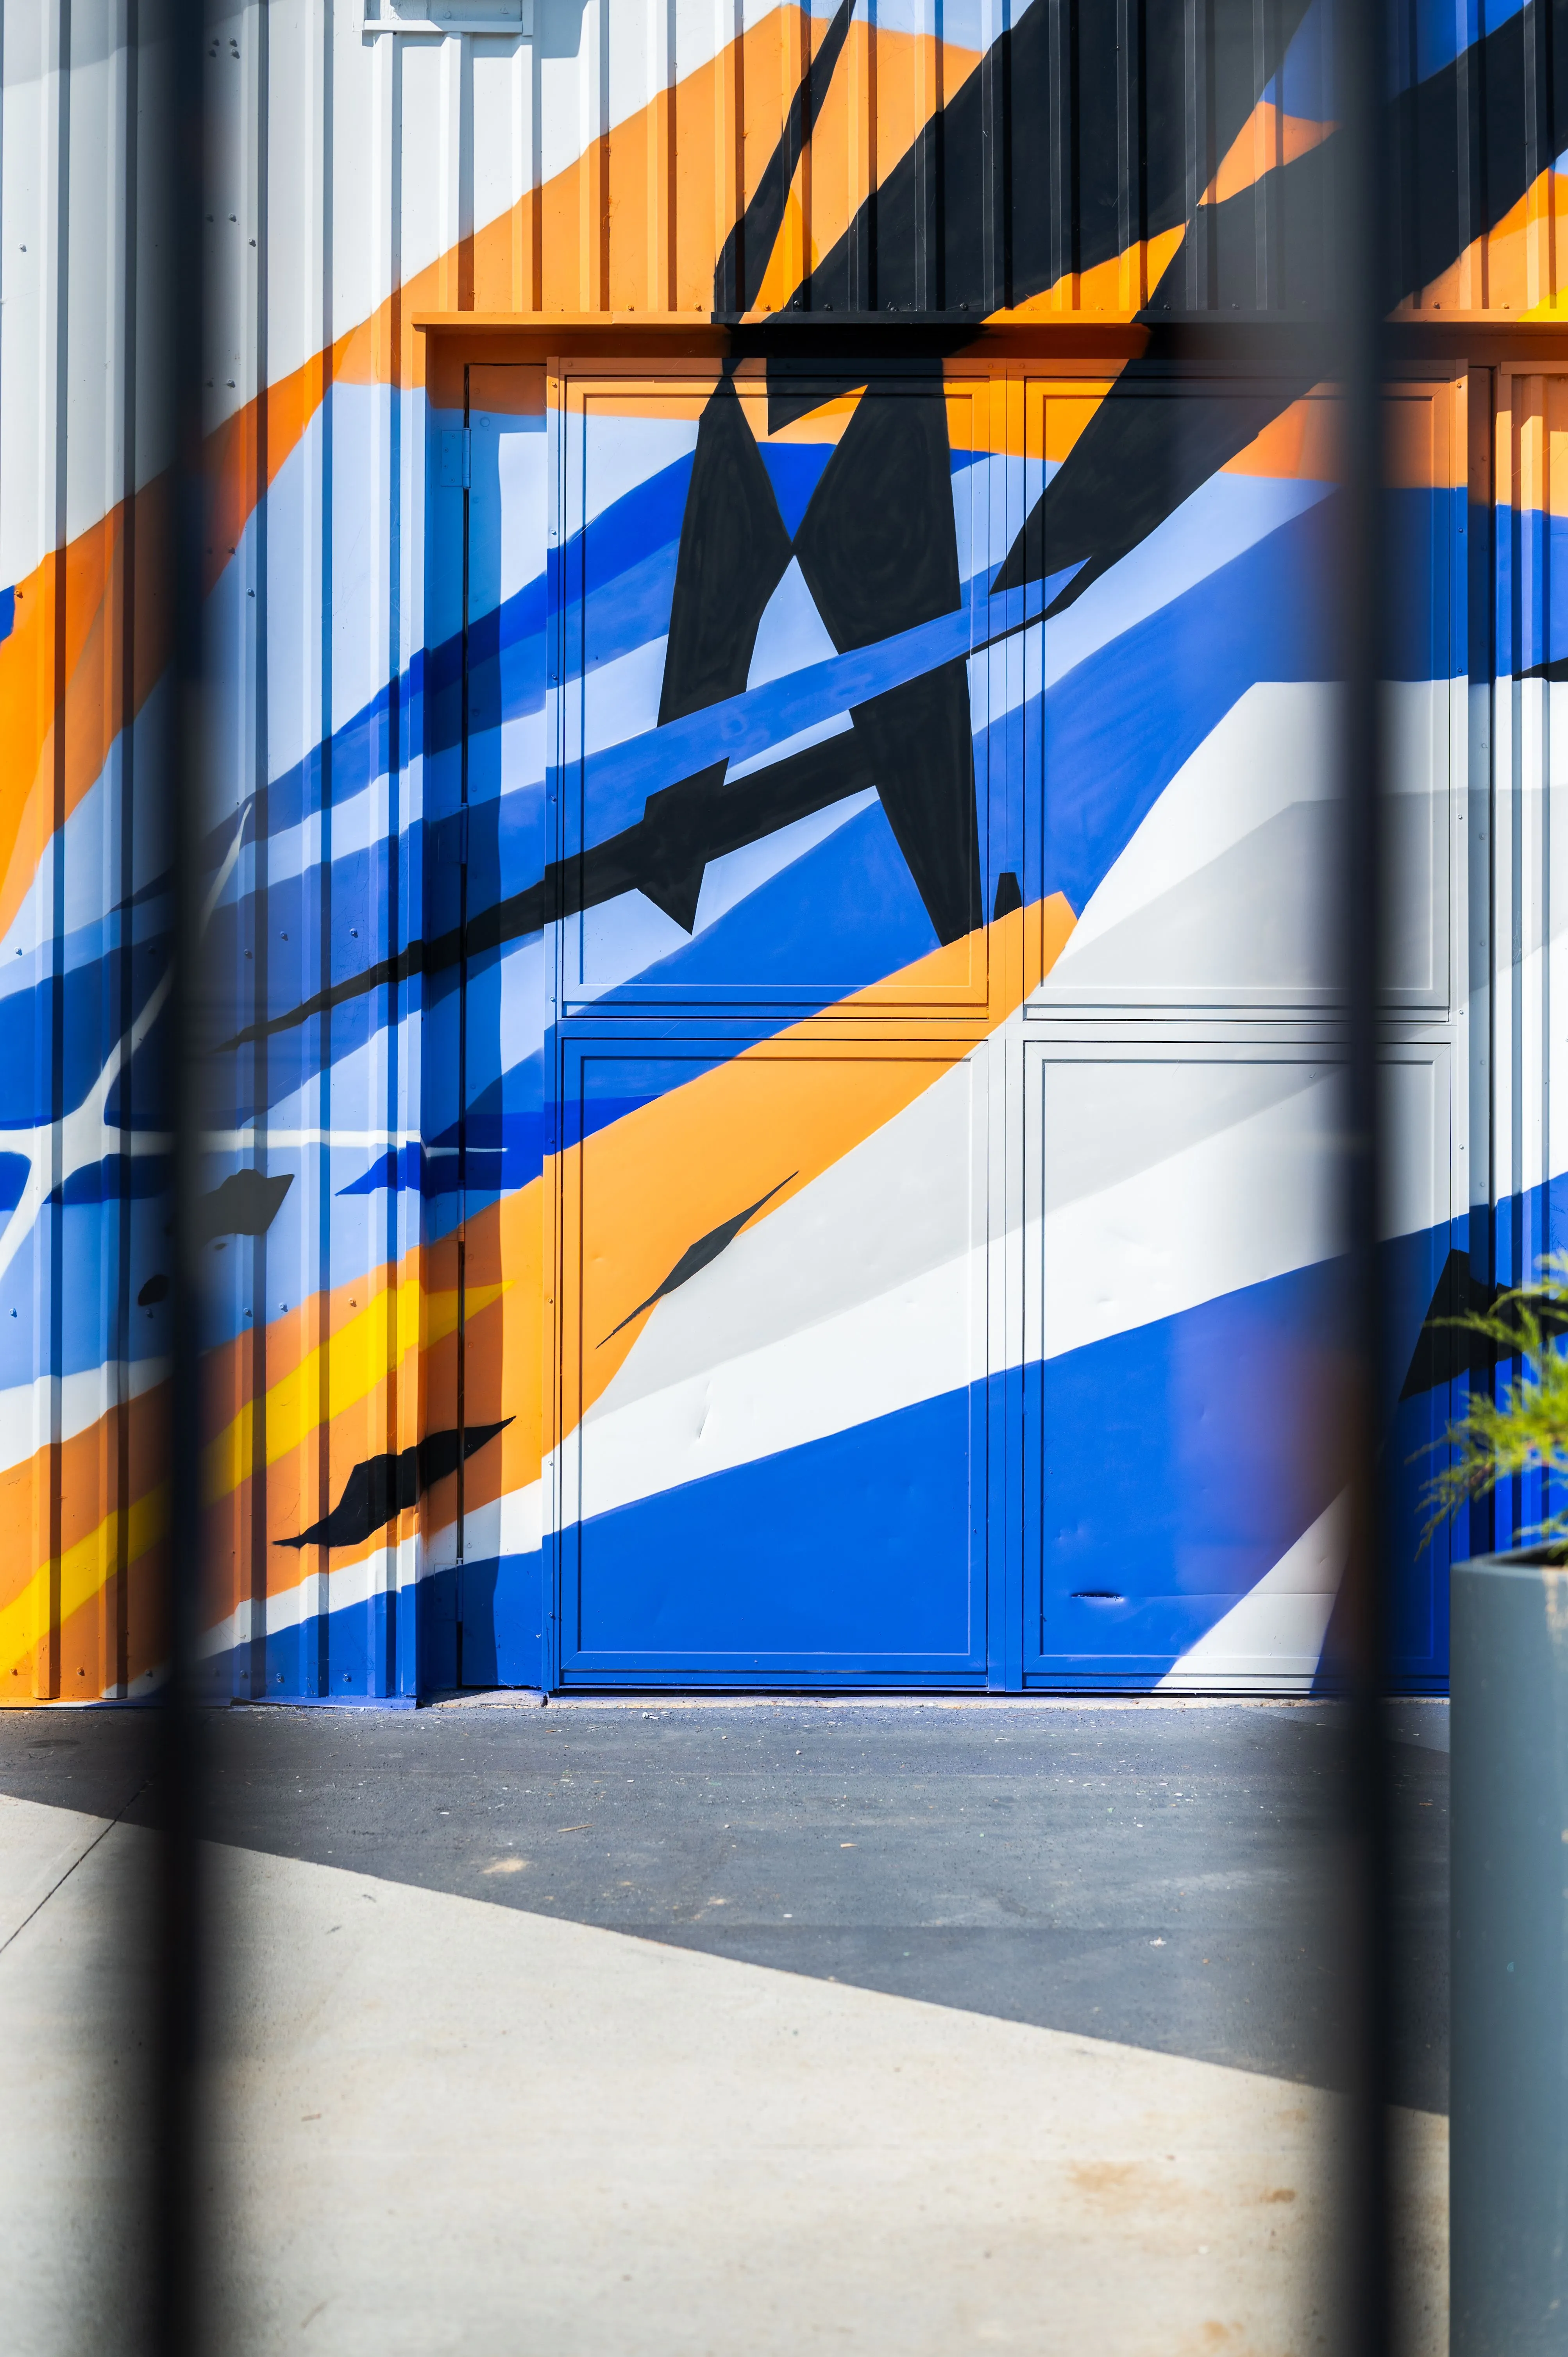 A colorful mural on the exterior of a building featuring geometric shapes in blue, white, and orange, with a blue door and shadows of nearby objects cast across the surface.